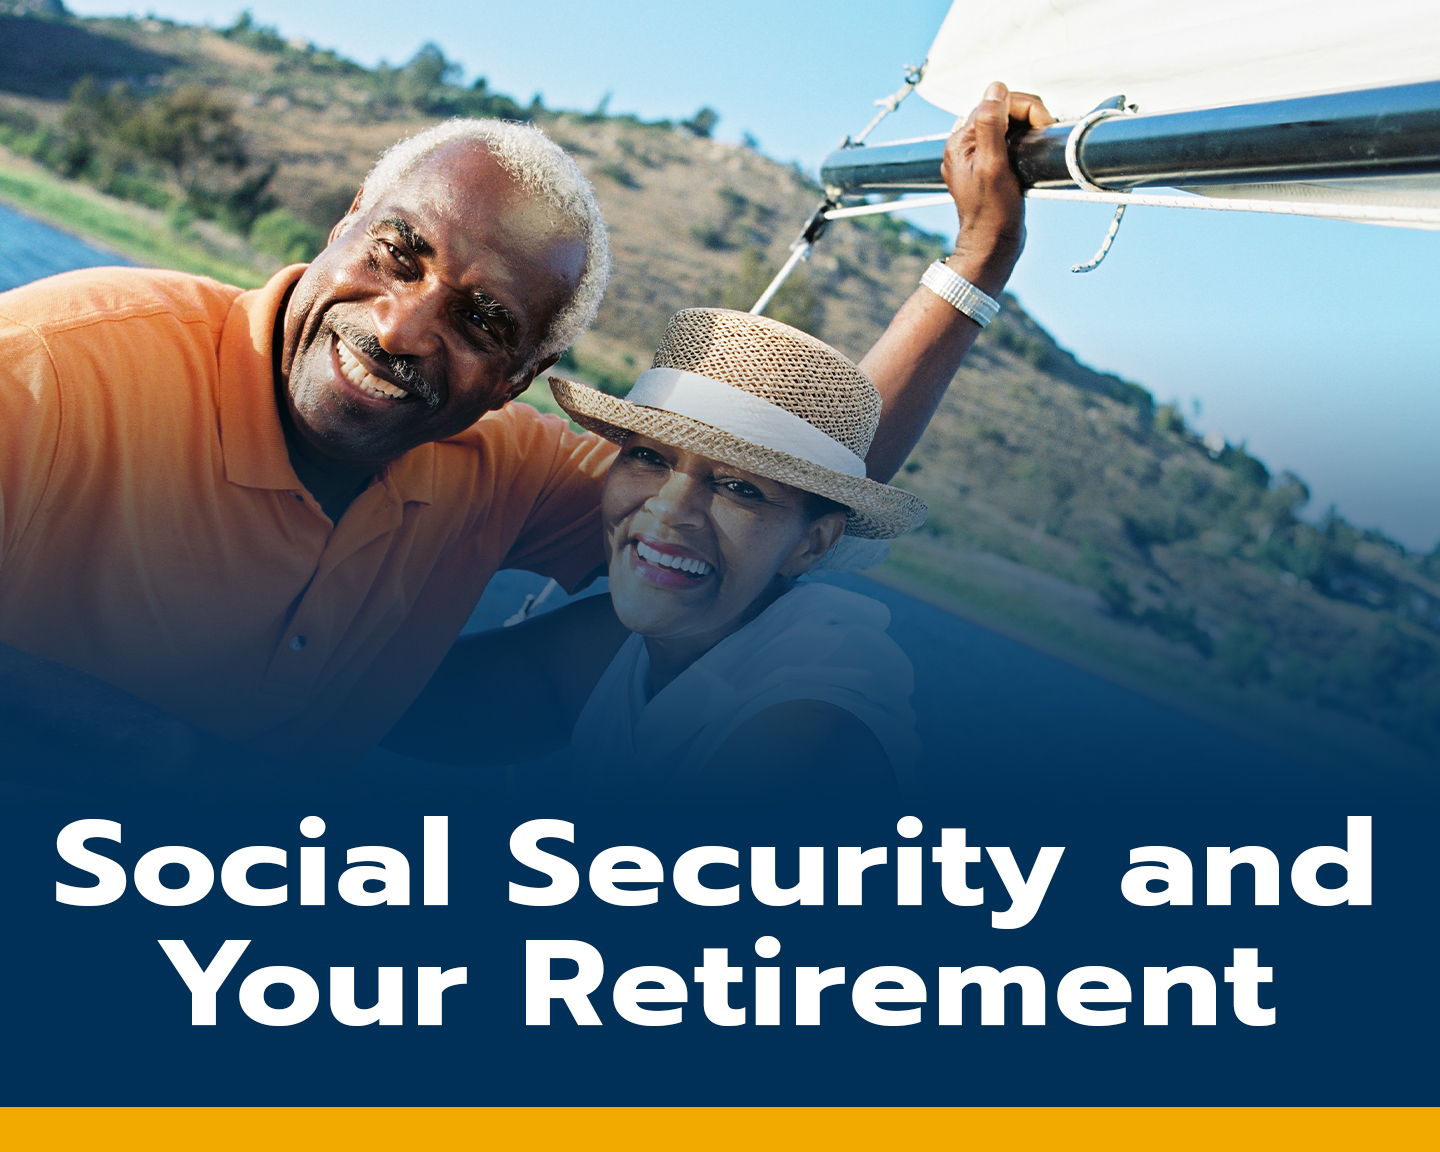 Social Security and Your Retirement.jpg